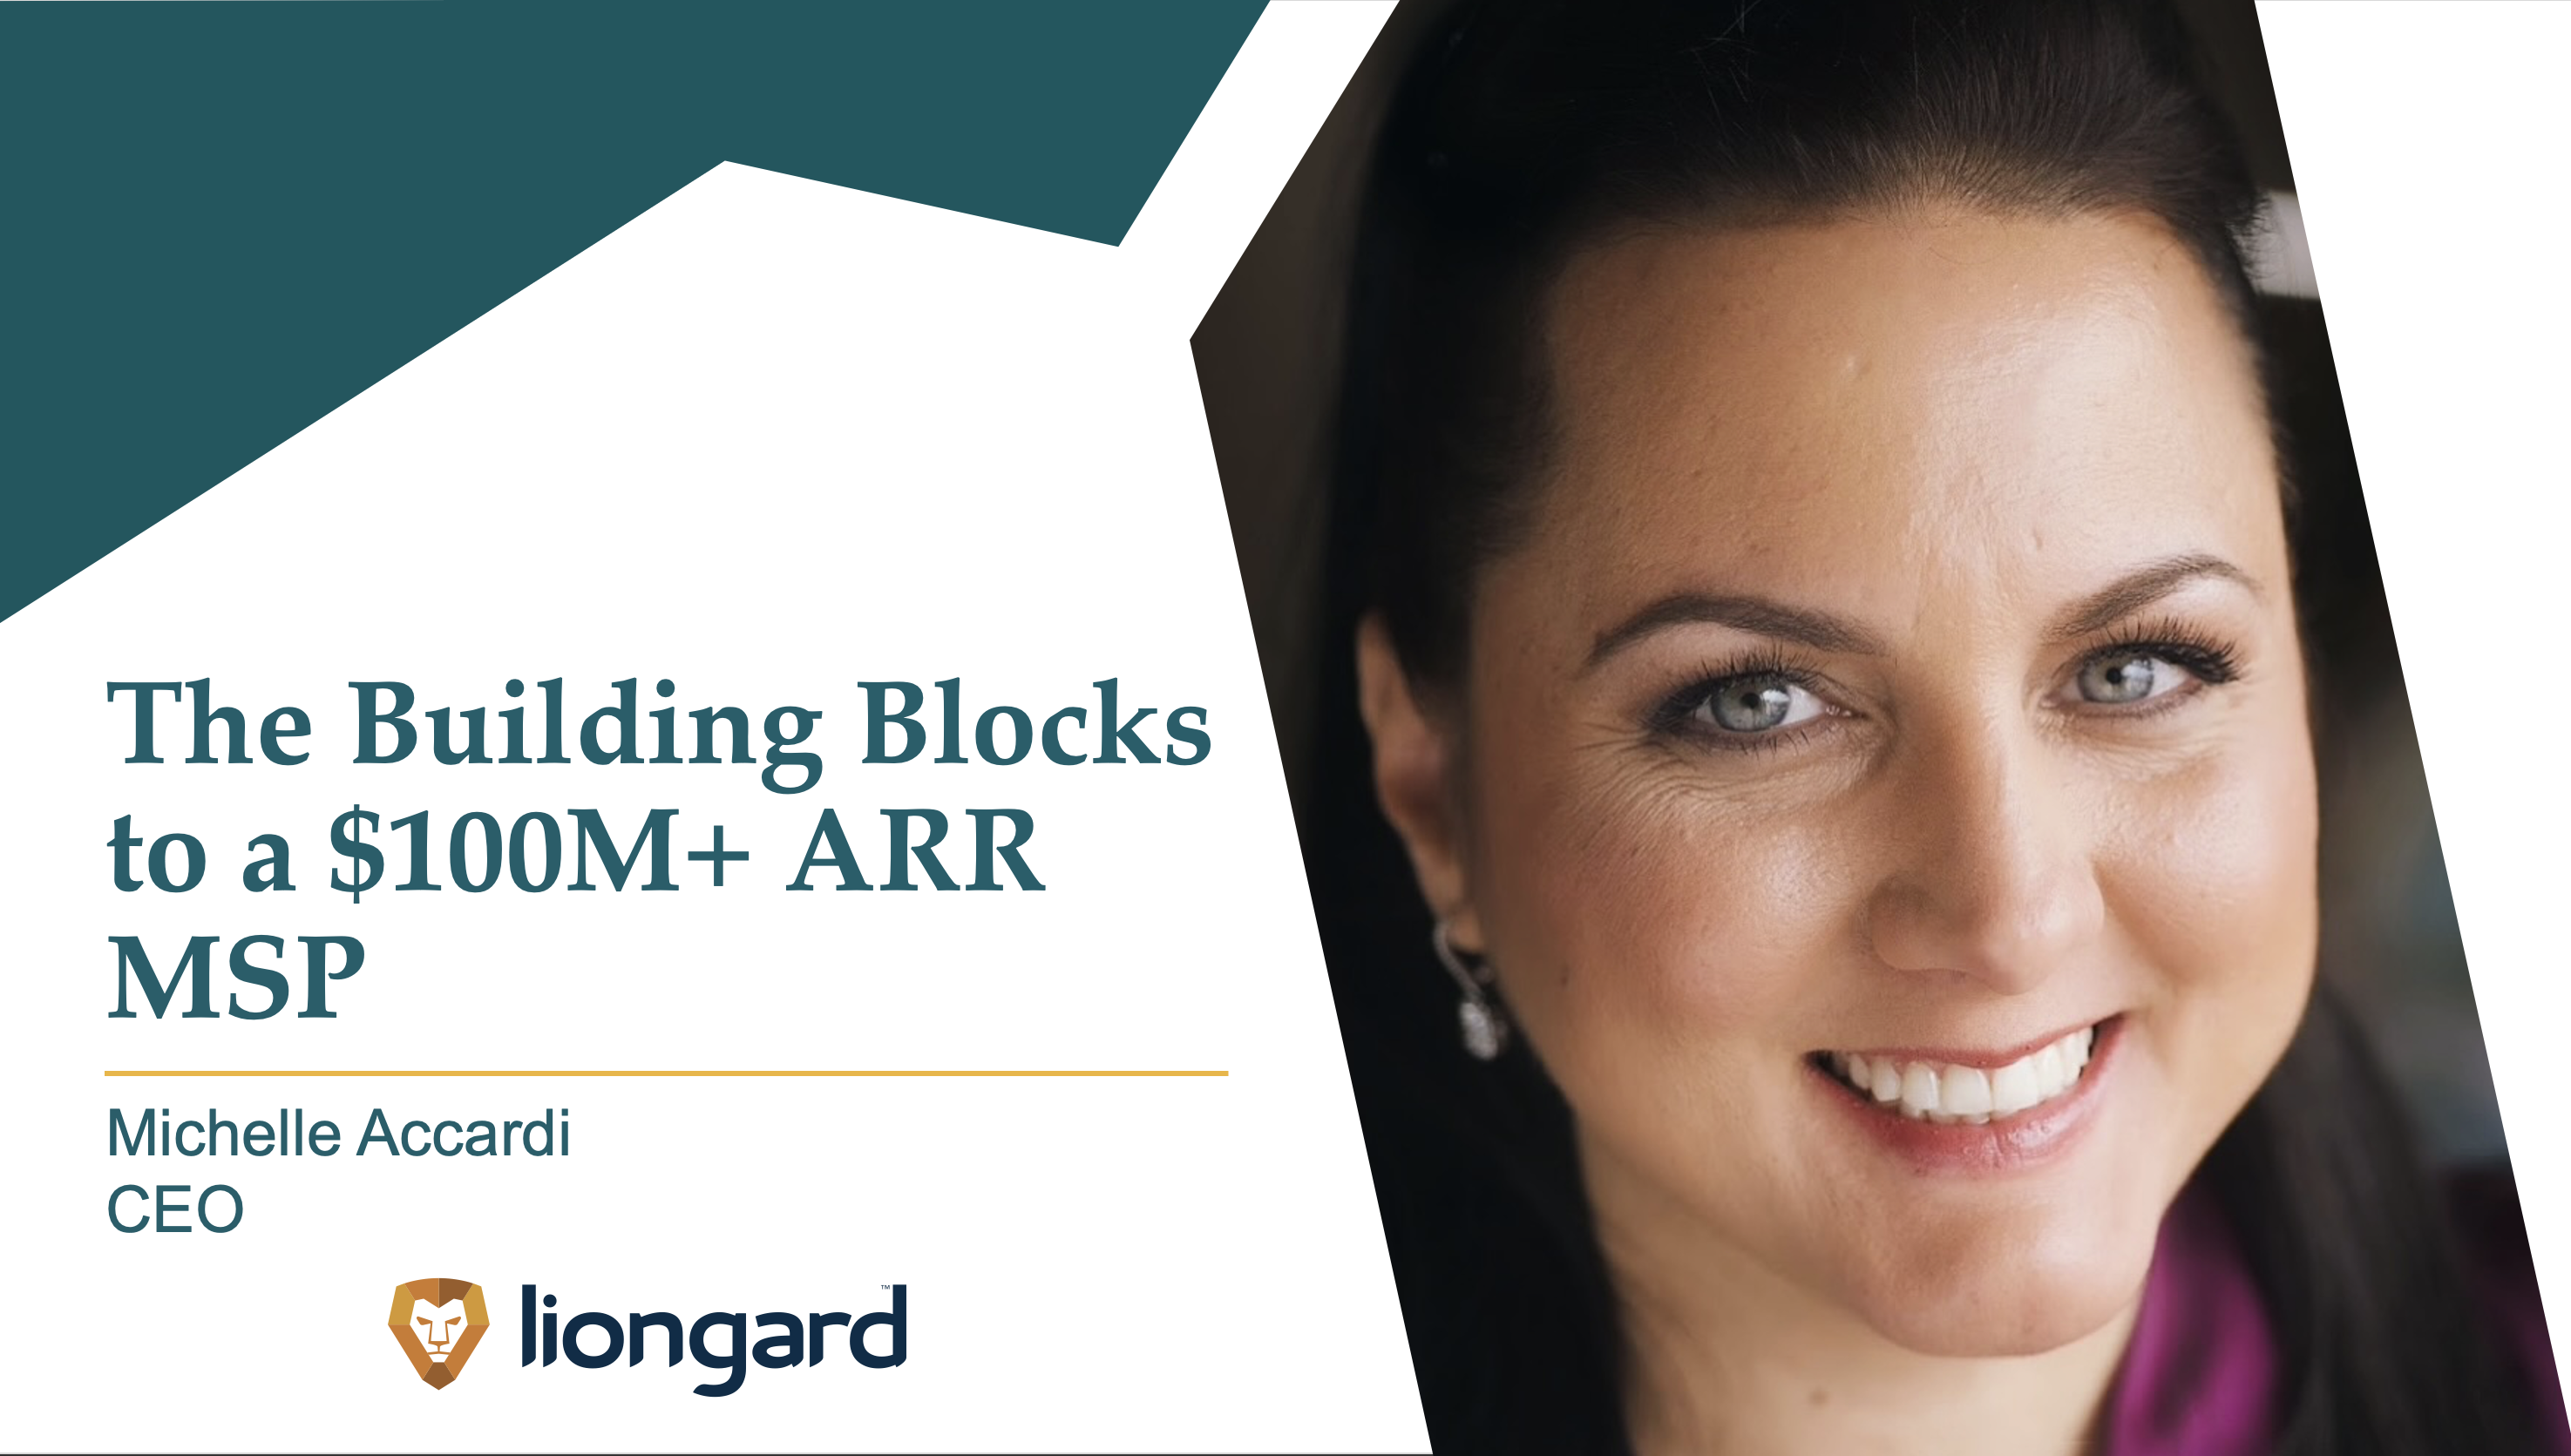 The Building Blocks to a $100M+ ARR MSP with Michelle Accardi, CEO of Liongard